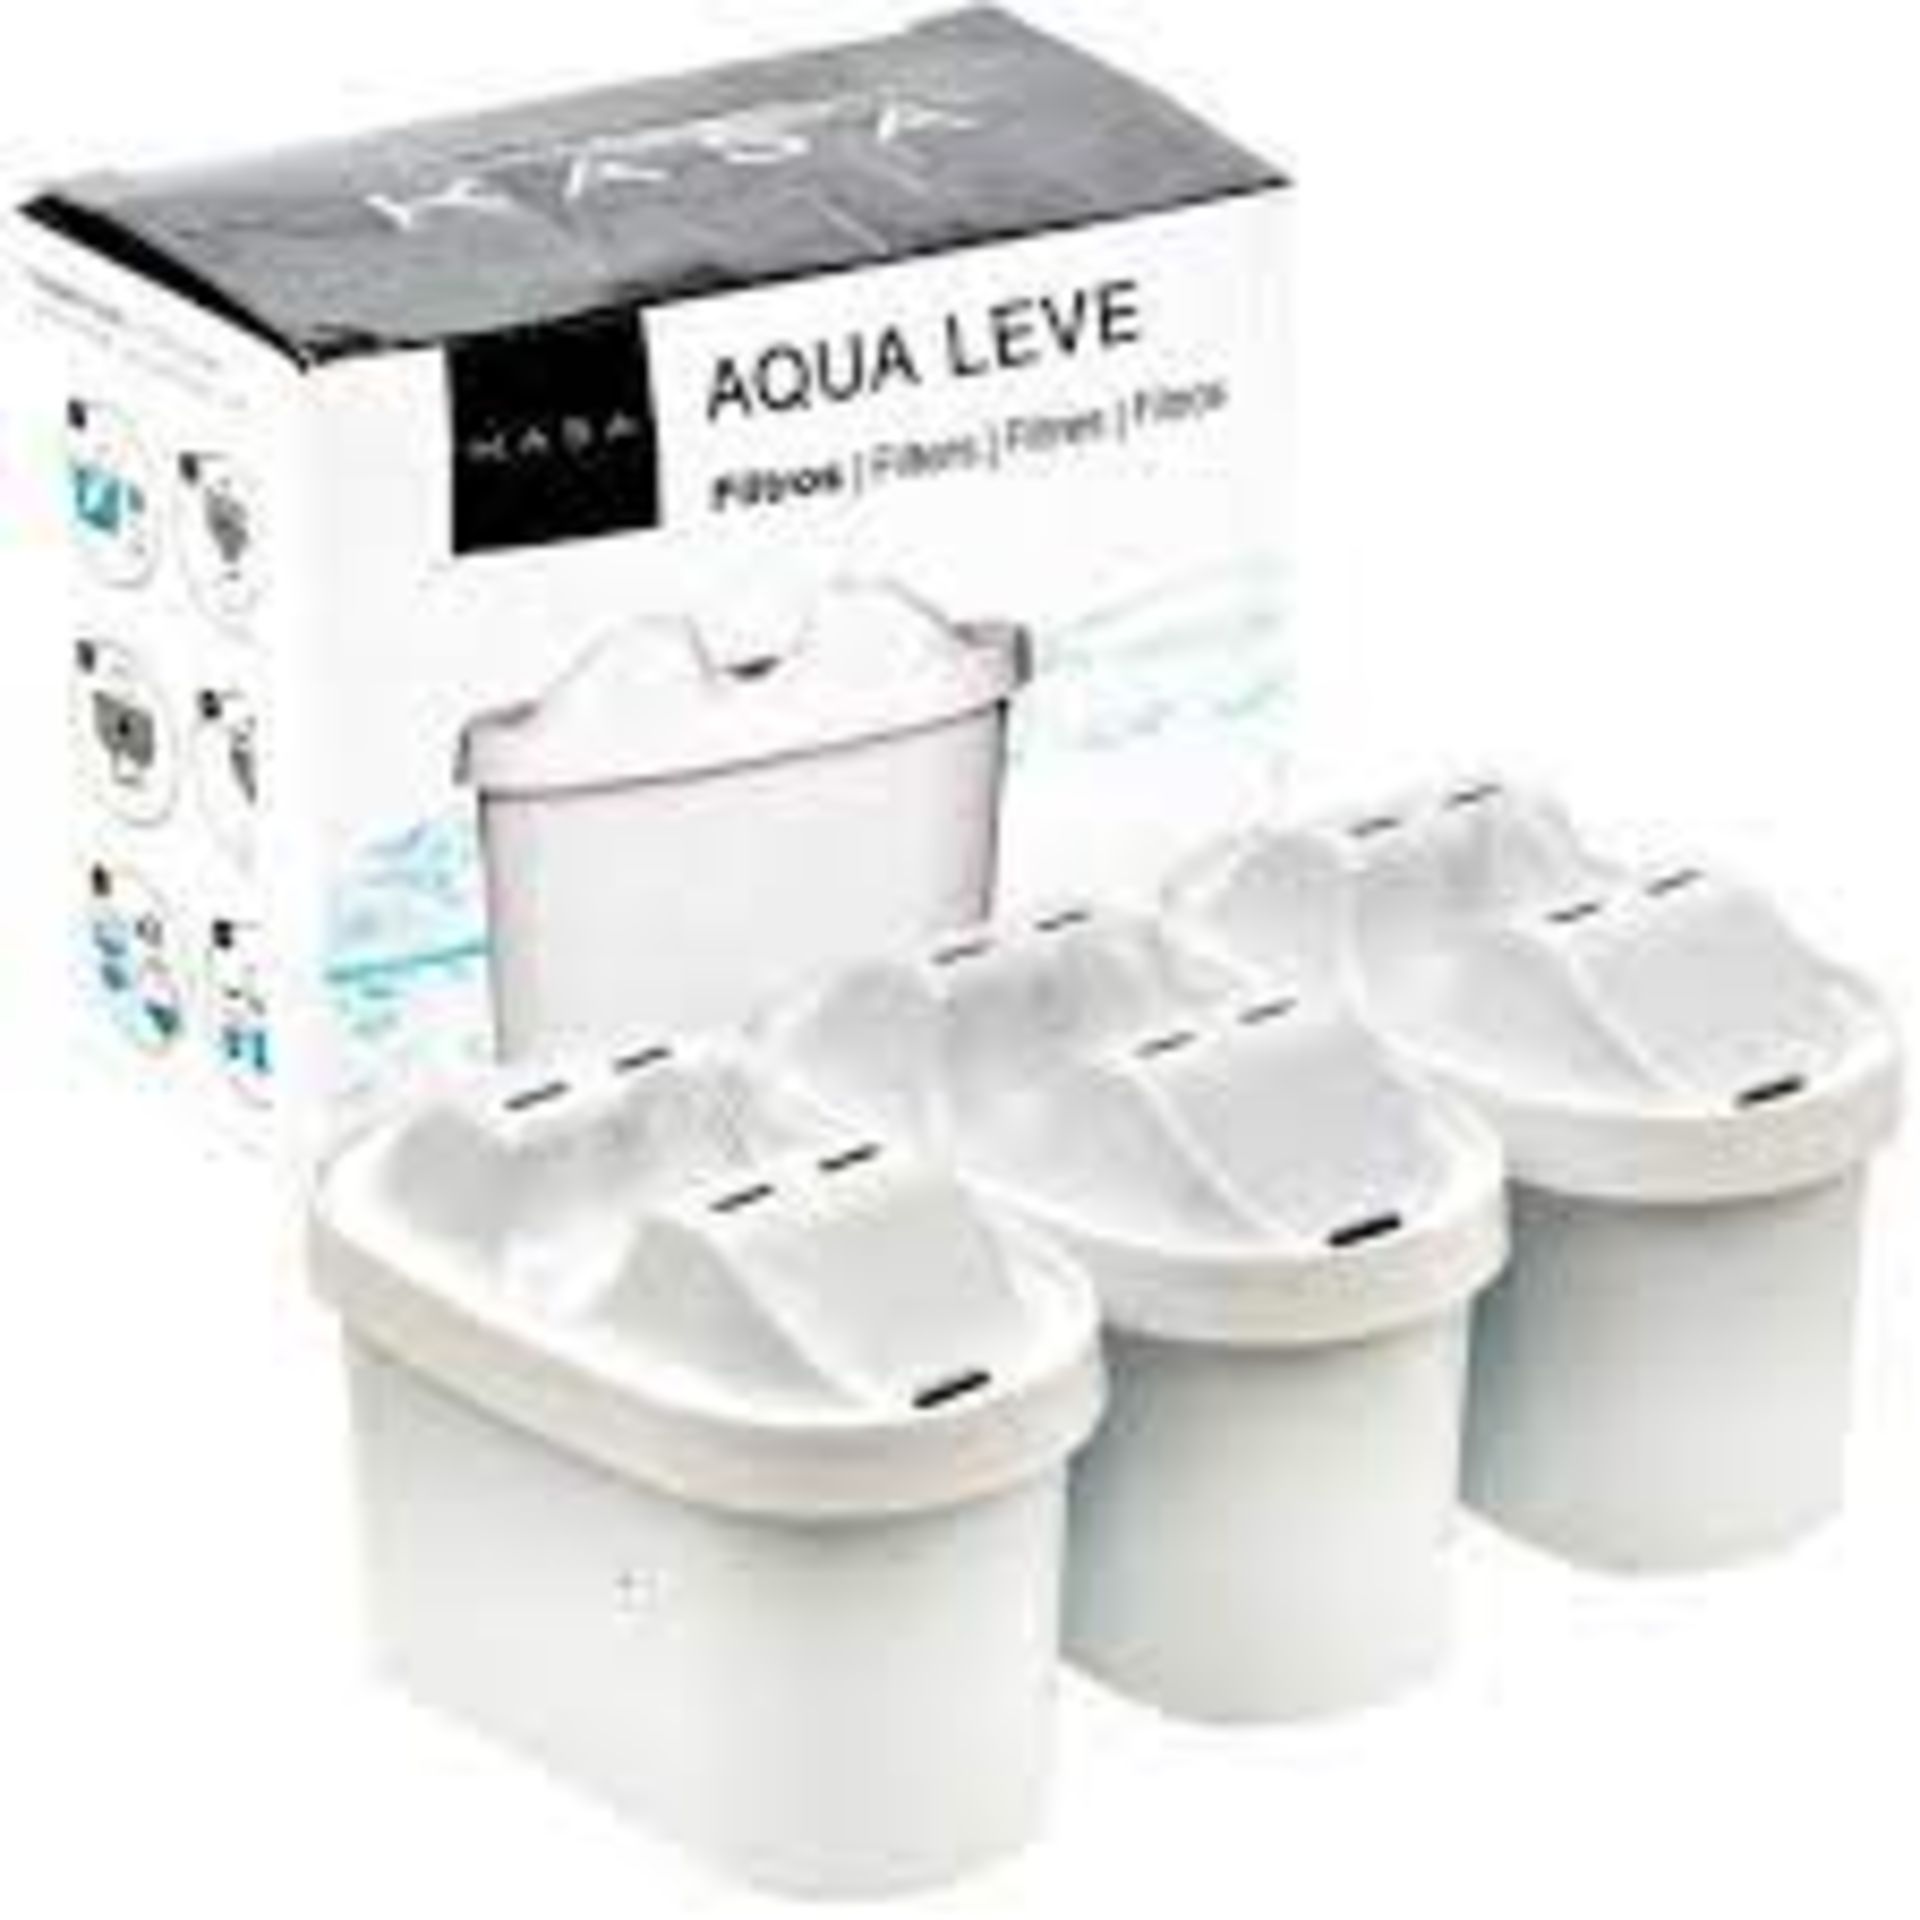 20 x New Boxed Sets of 3 Kasa Aqua Leve Water Filters. (Total of 60 Filters Within This Lot) (ROW1.